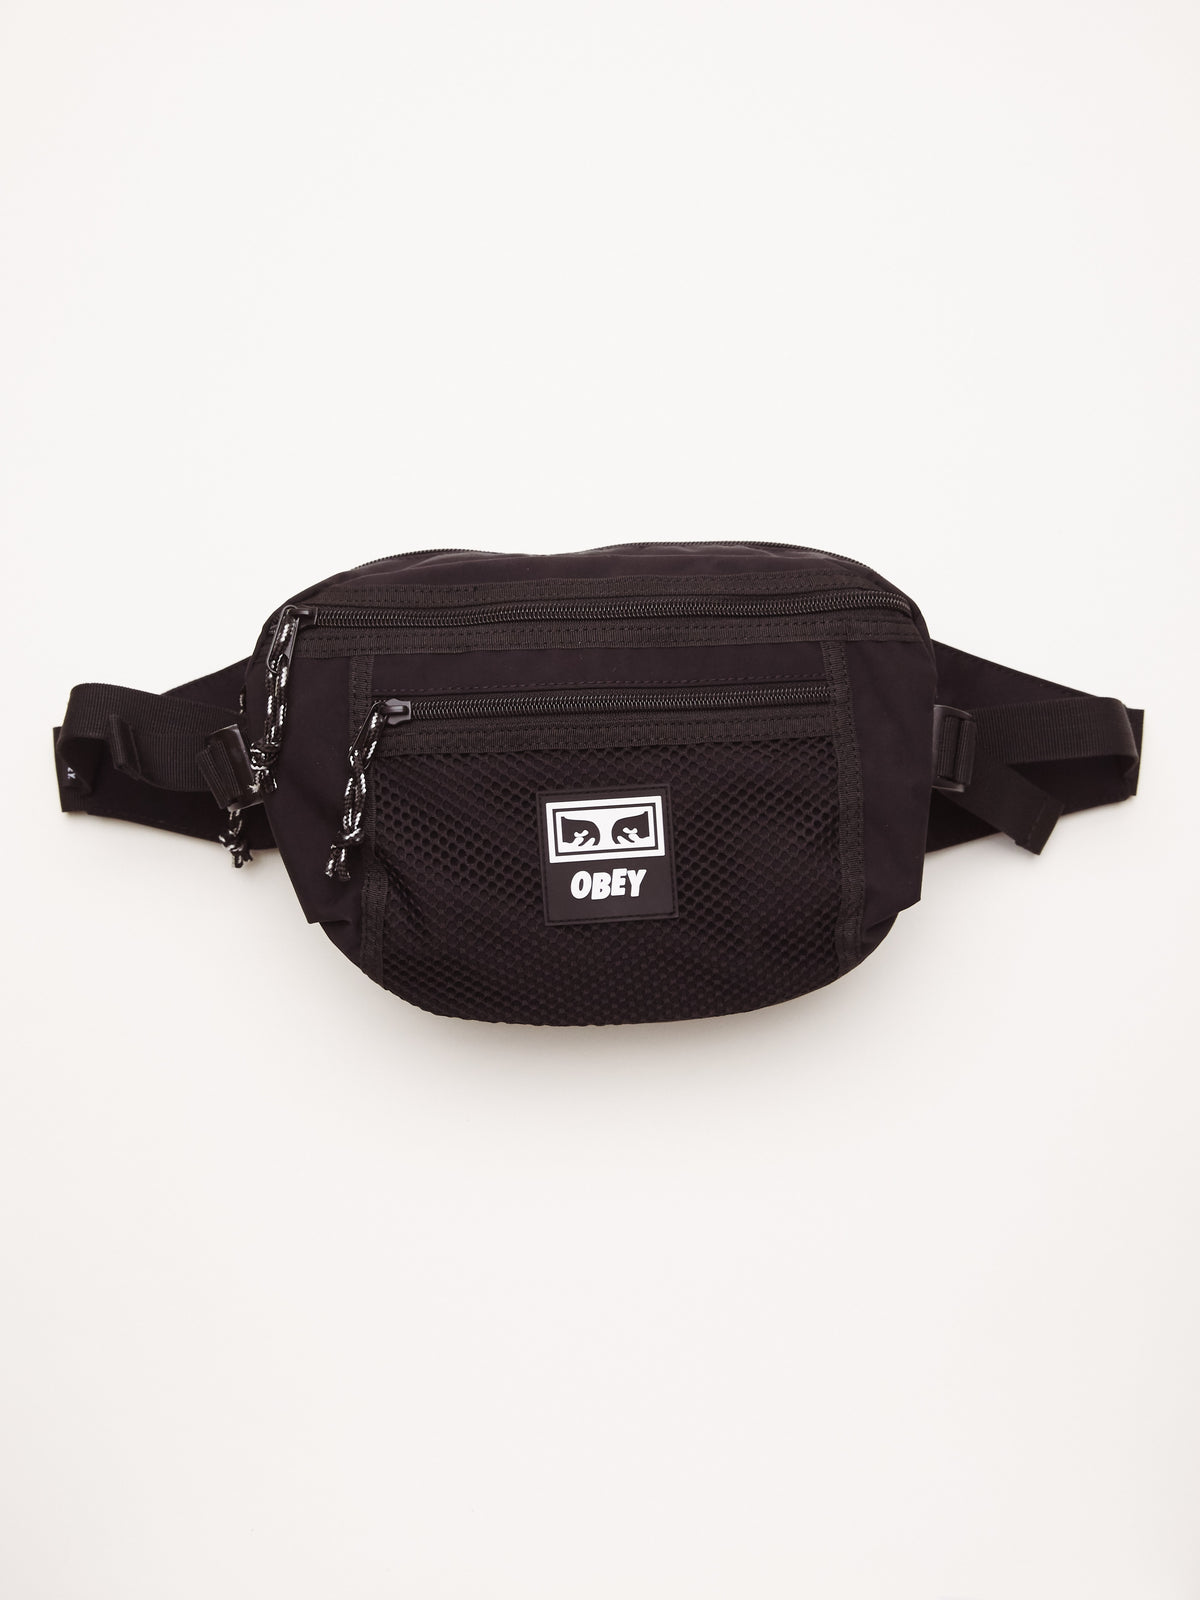 OBEY - Conditions Waist Bag, Black